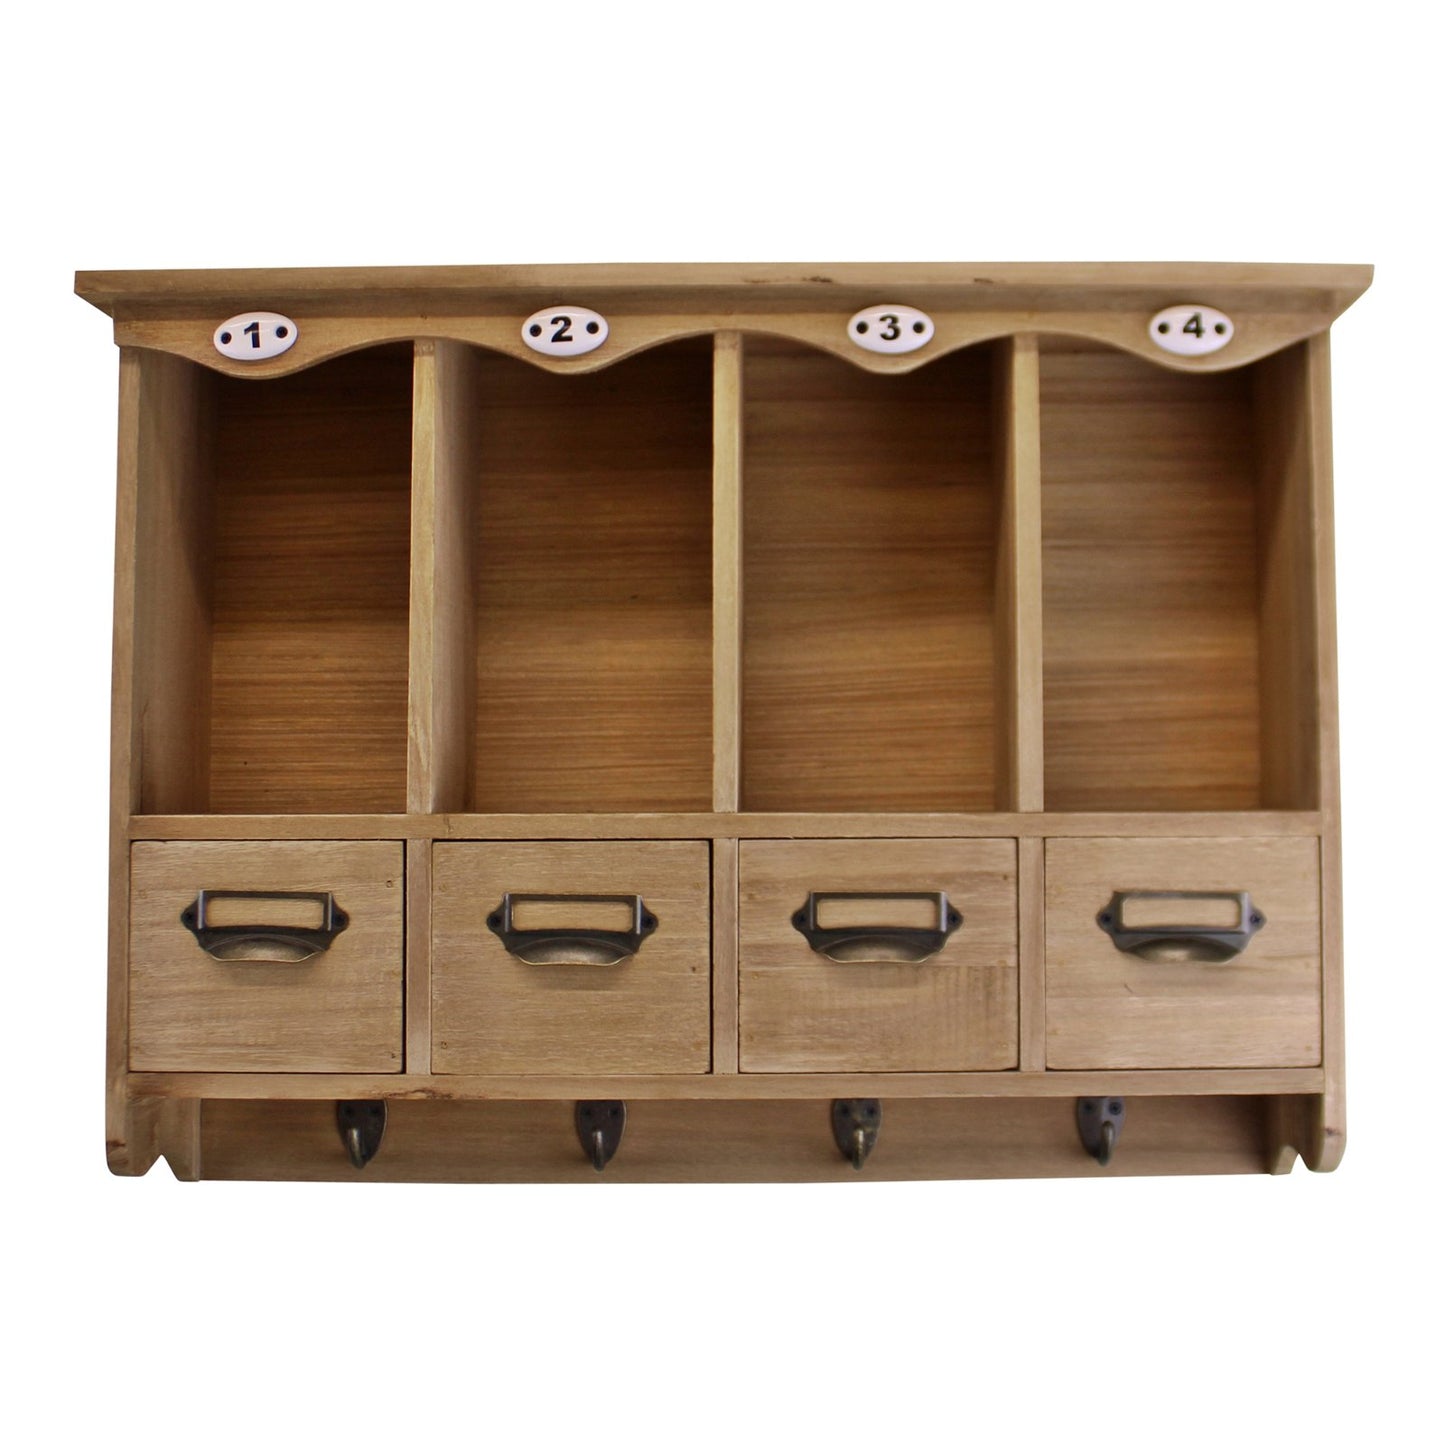 Wooden Wall Hanging Storage Unit